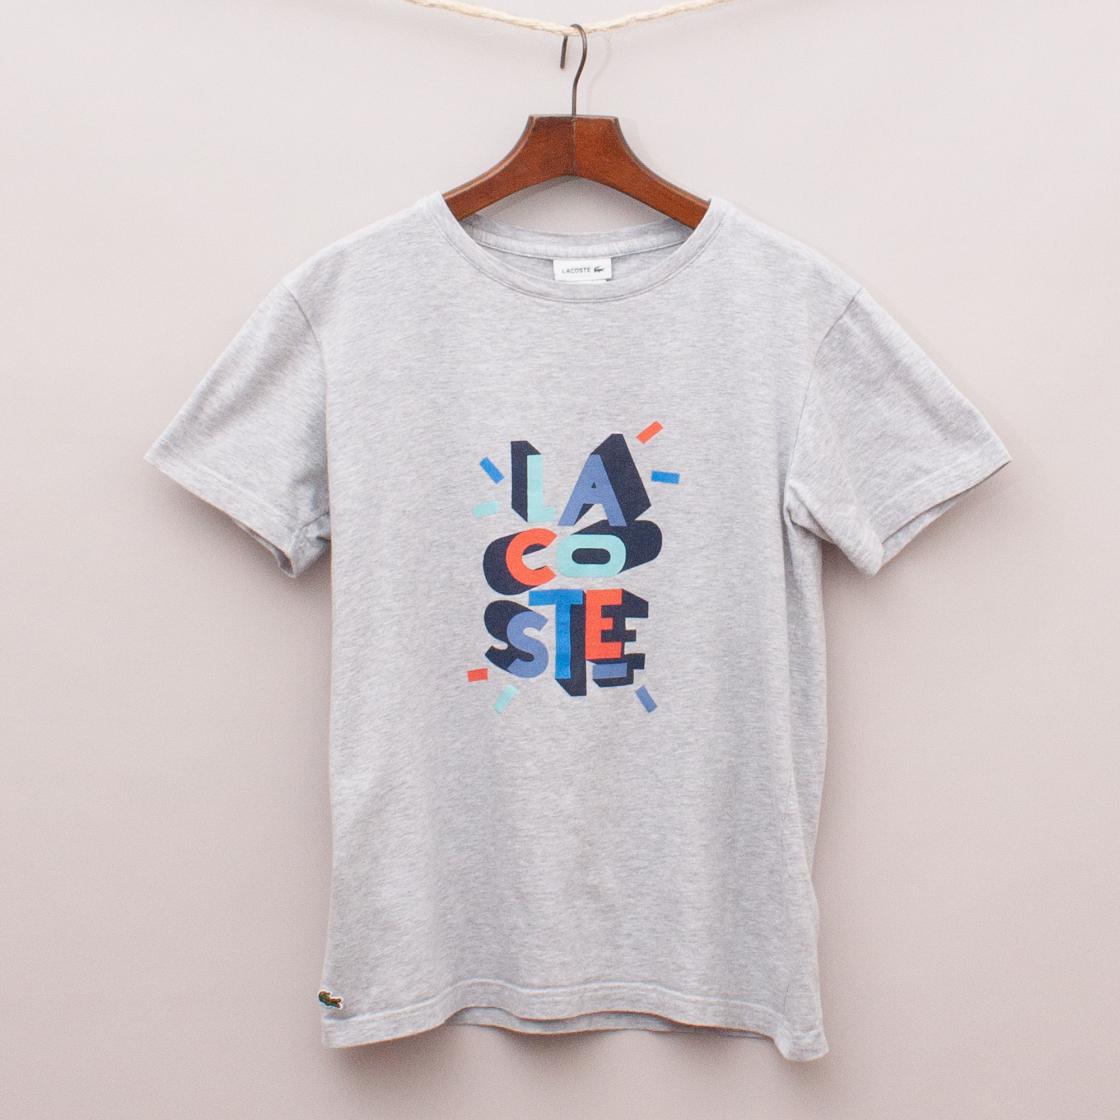 Lacoste Printed T-Shirt